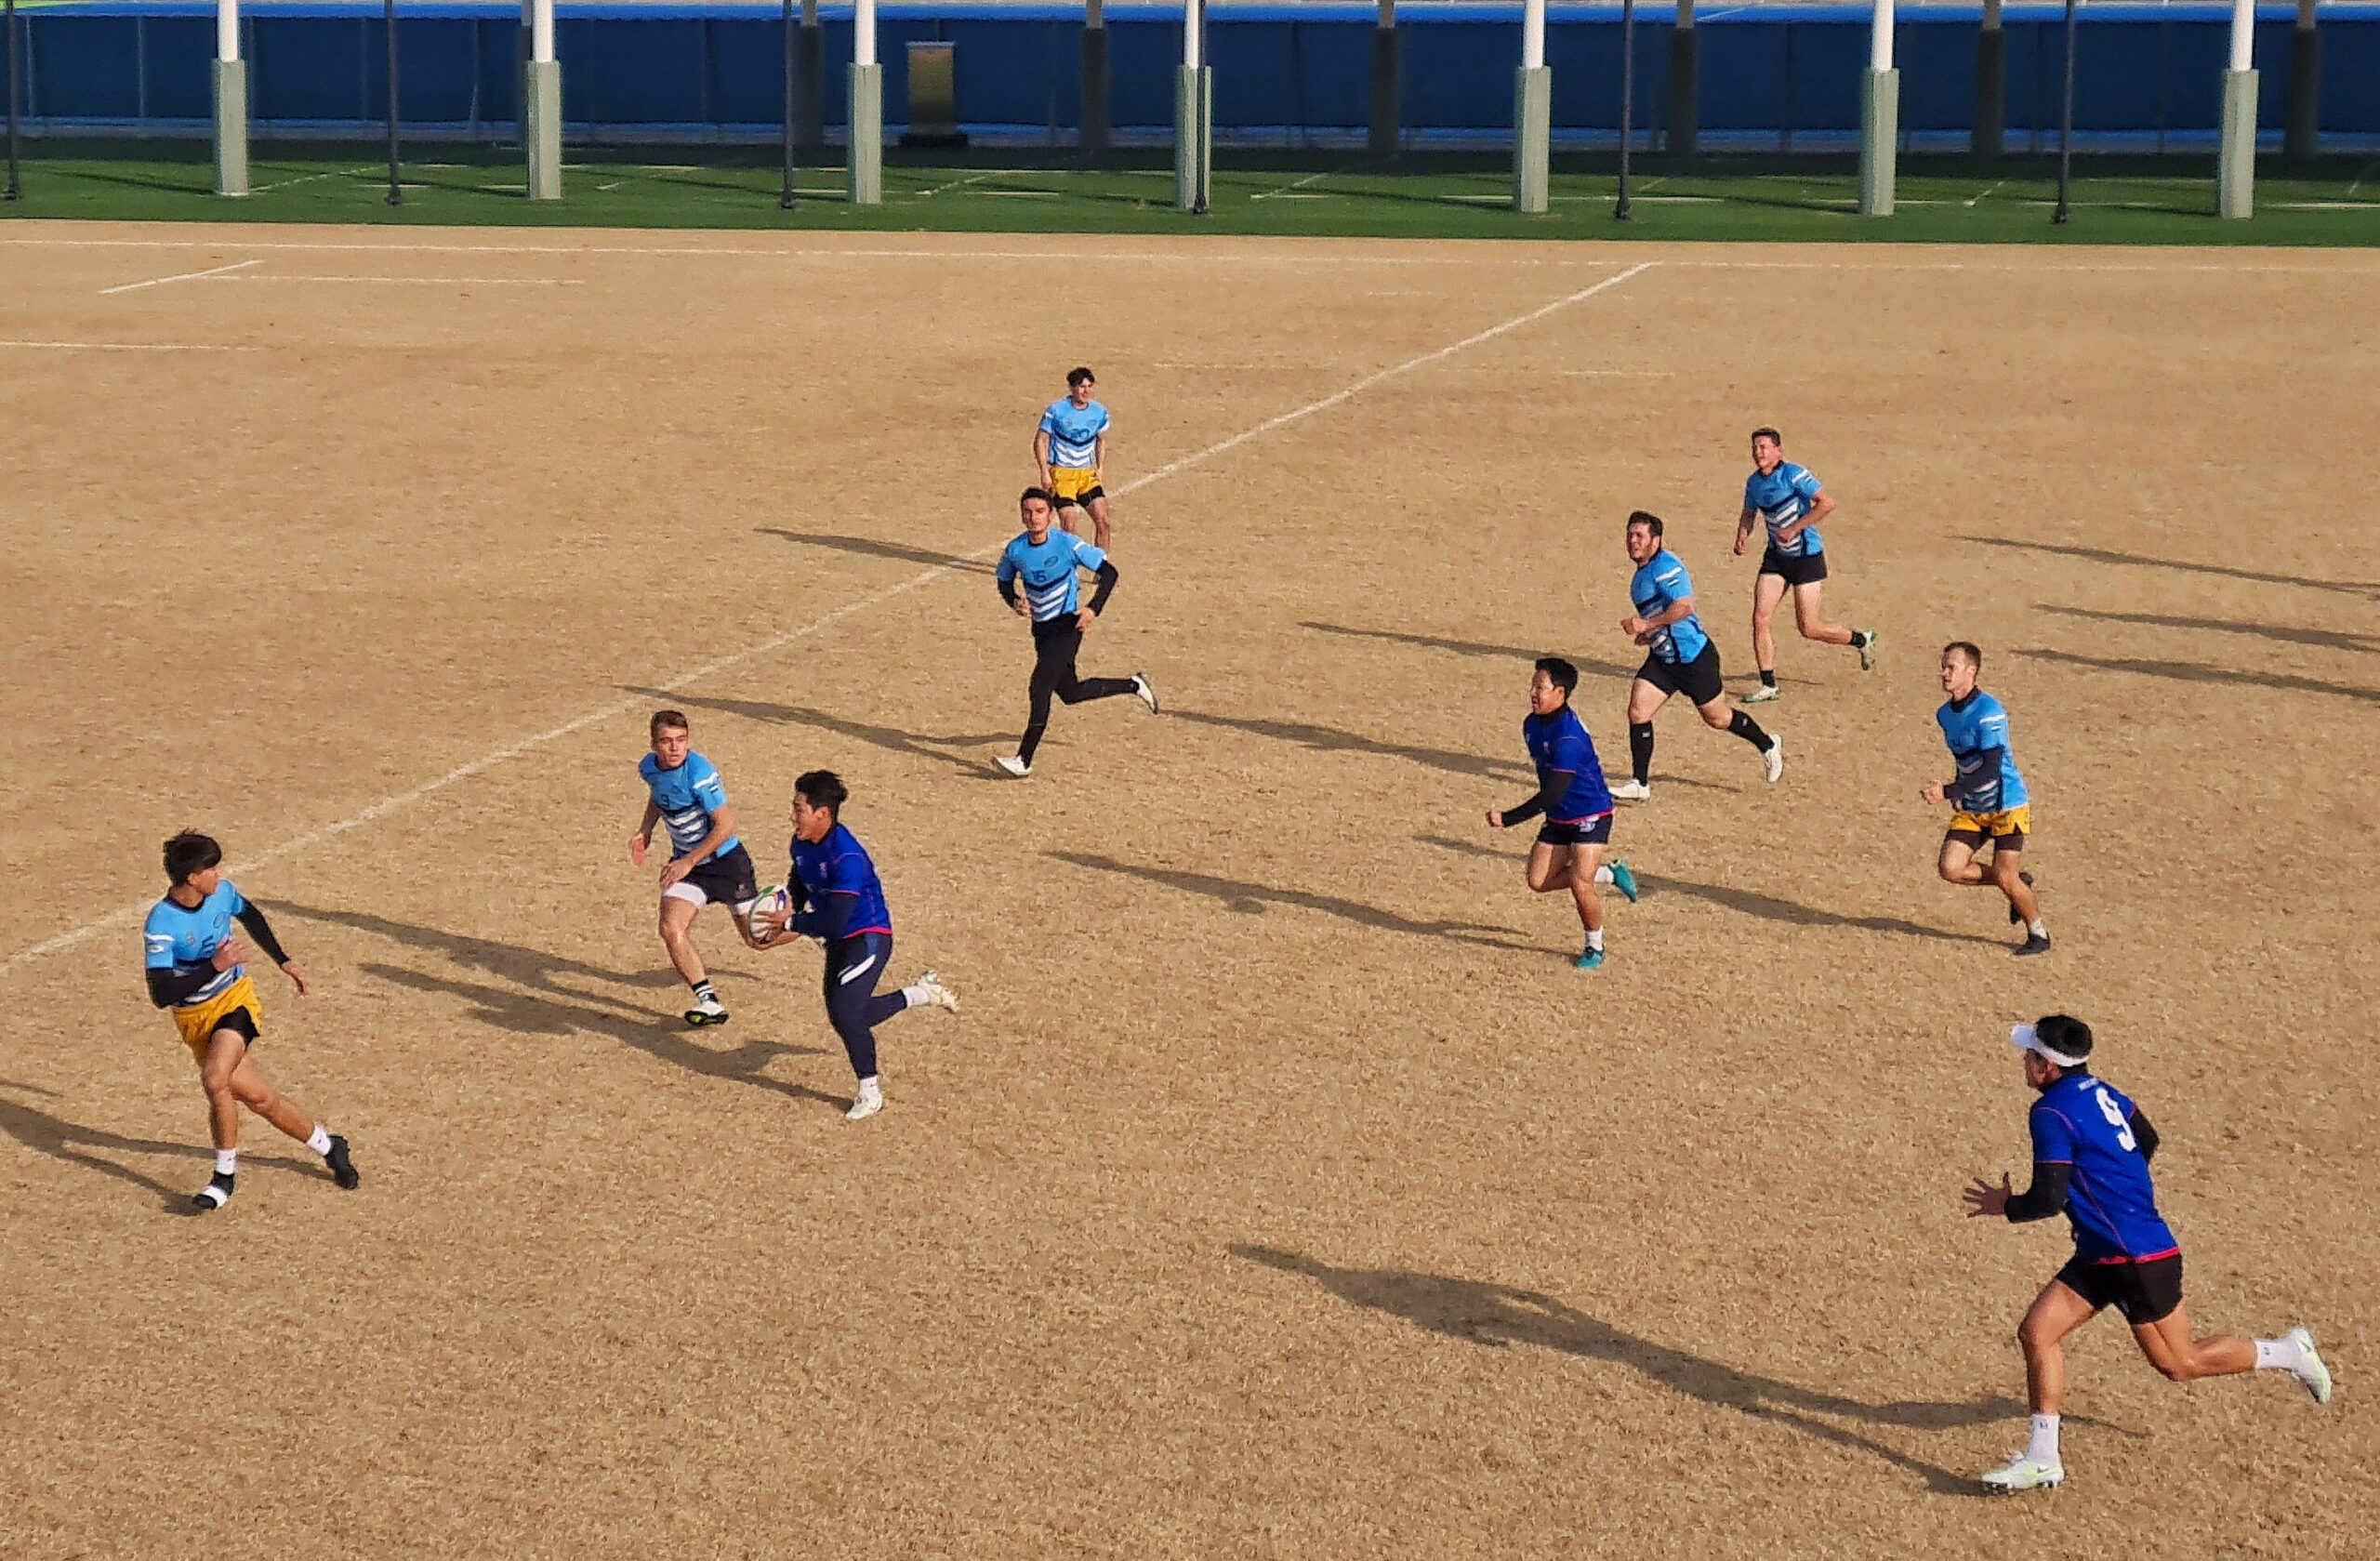 Uzbekistan rugby-7 team continues their training in Korea